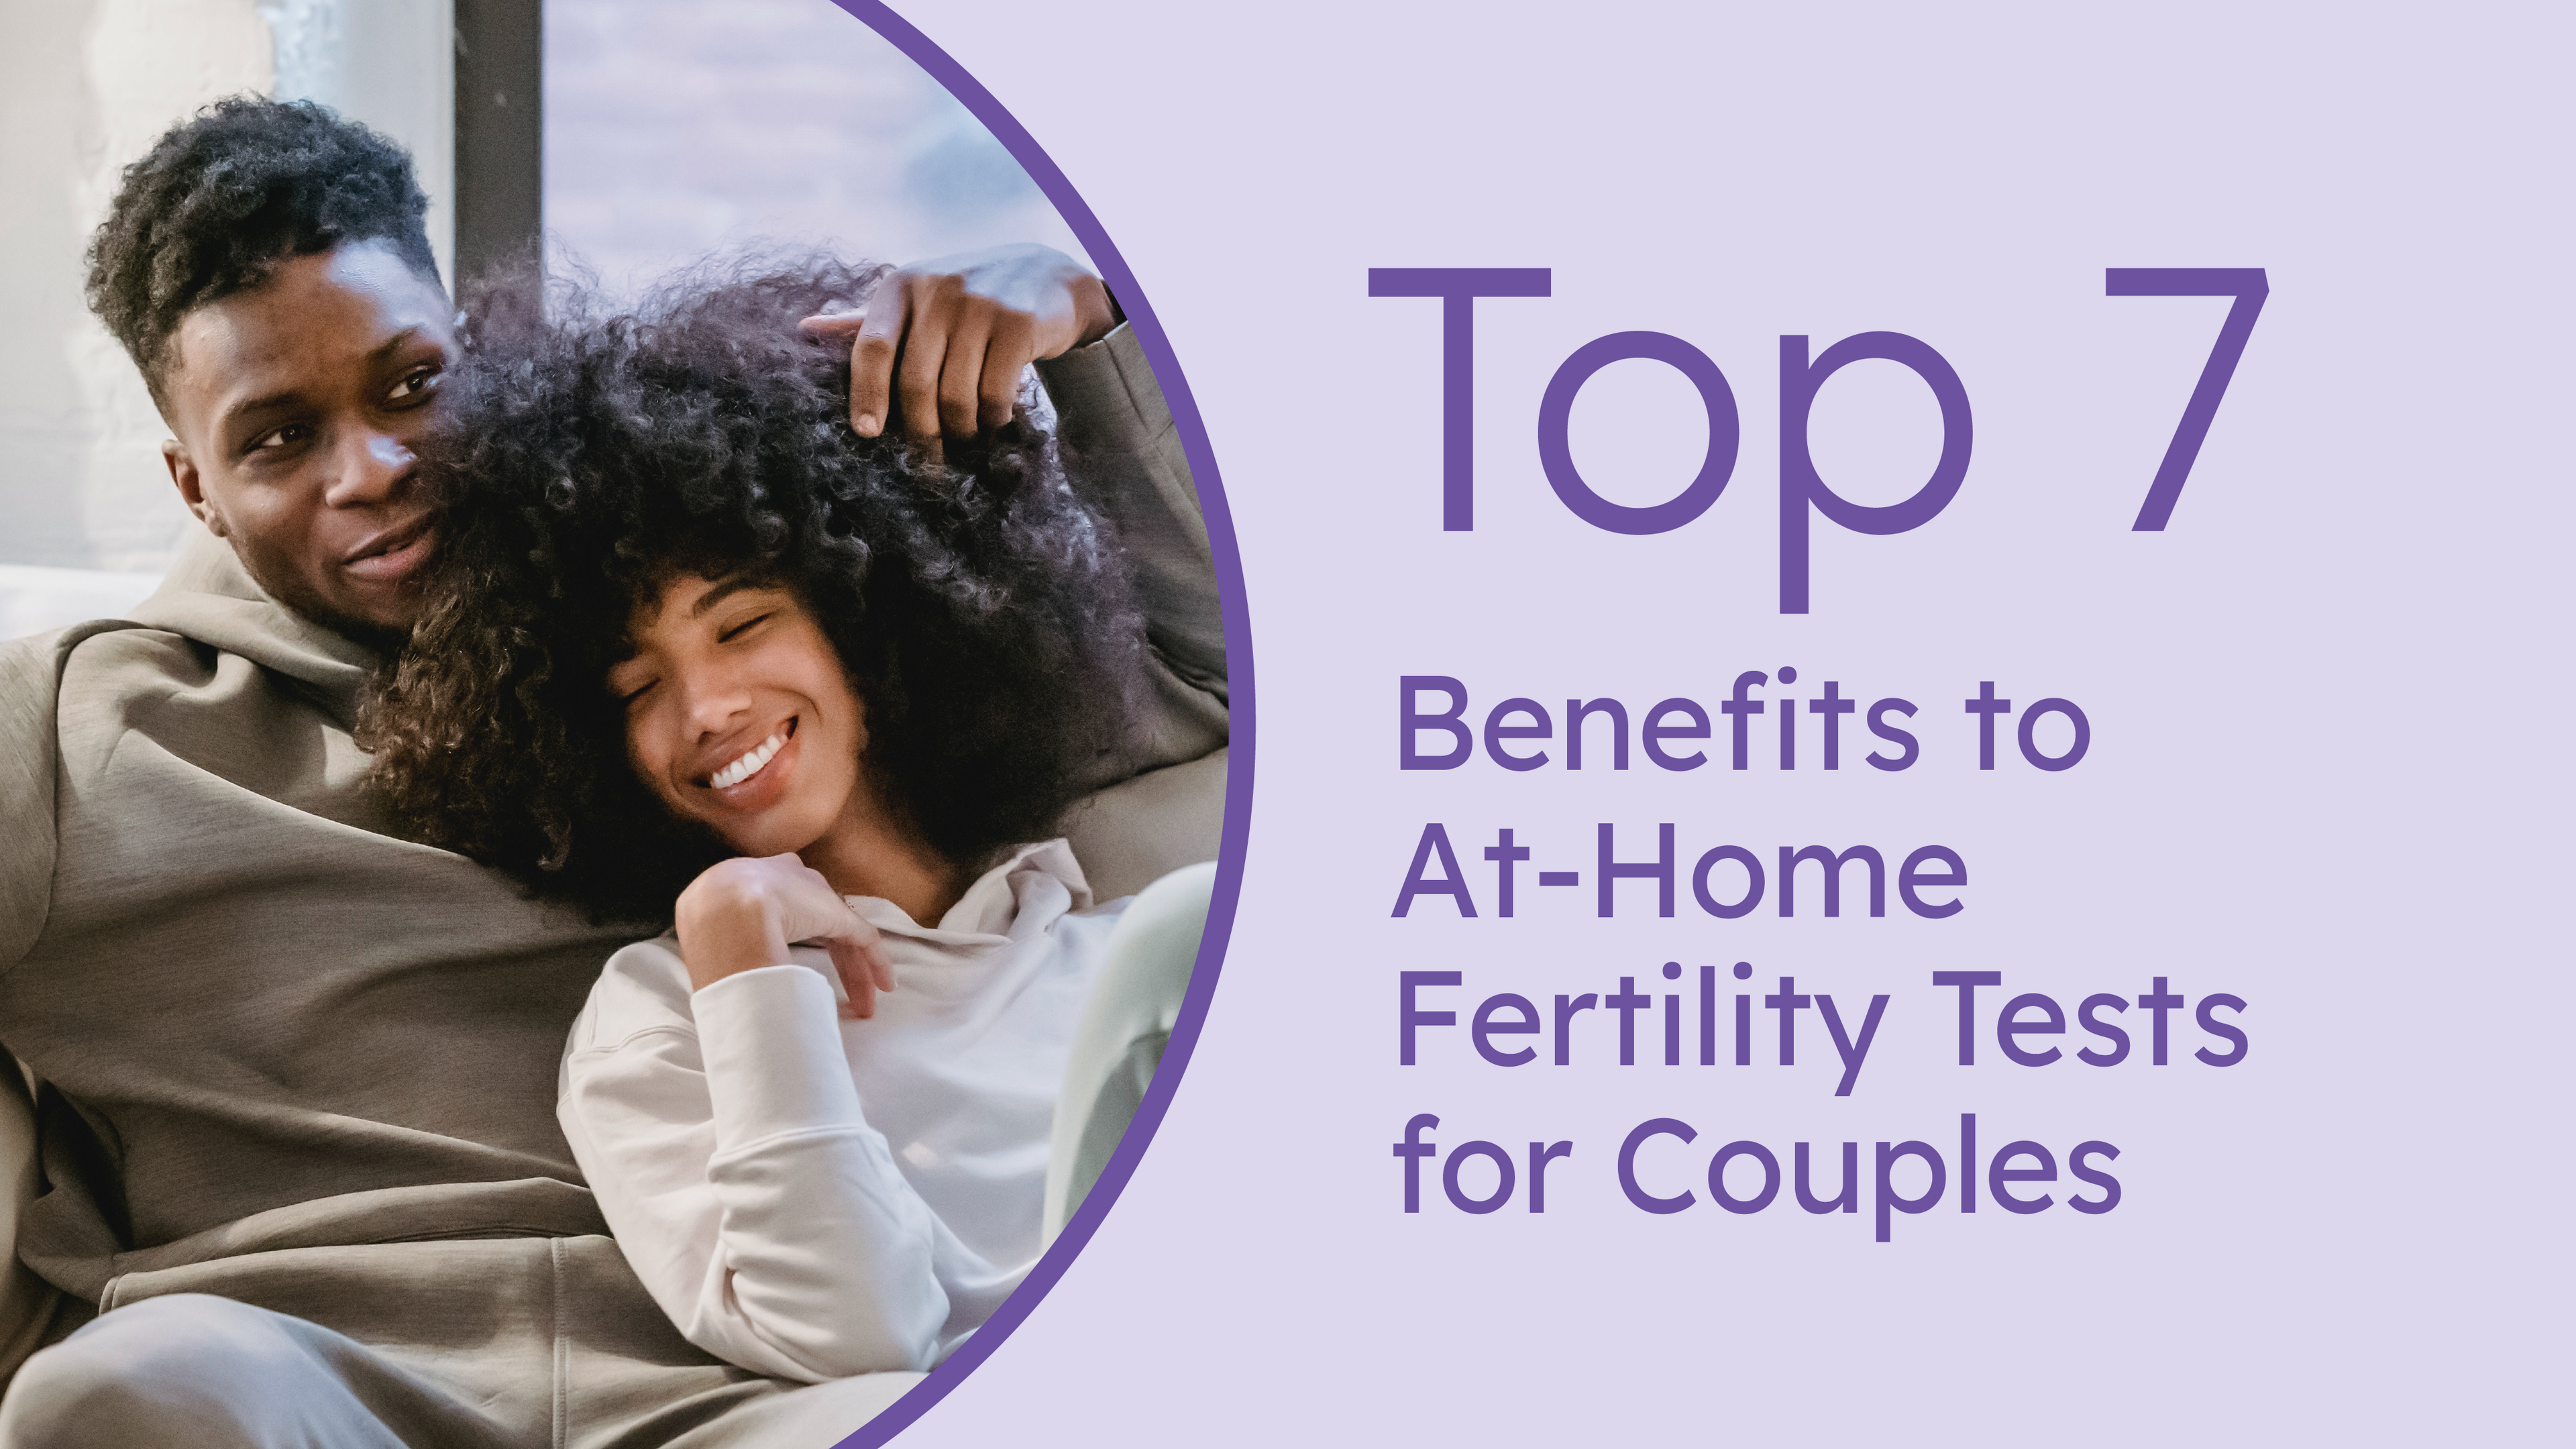 Top 7 Benefits to At-Home Fertility Tests for Couples